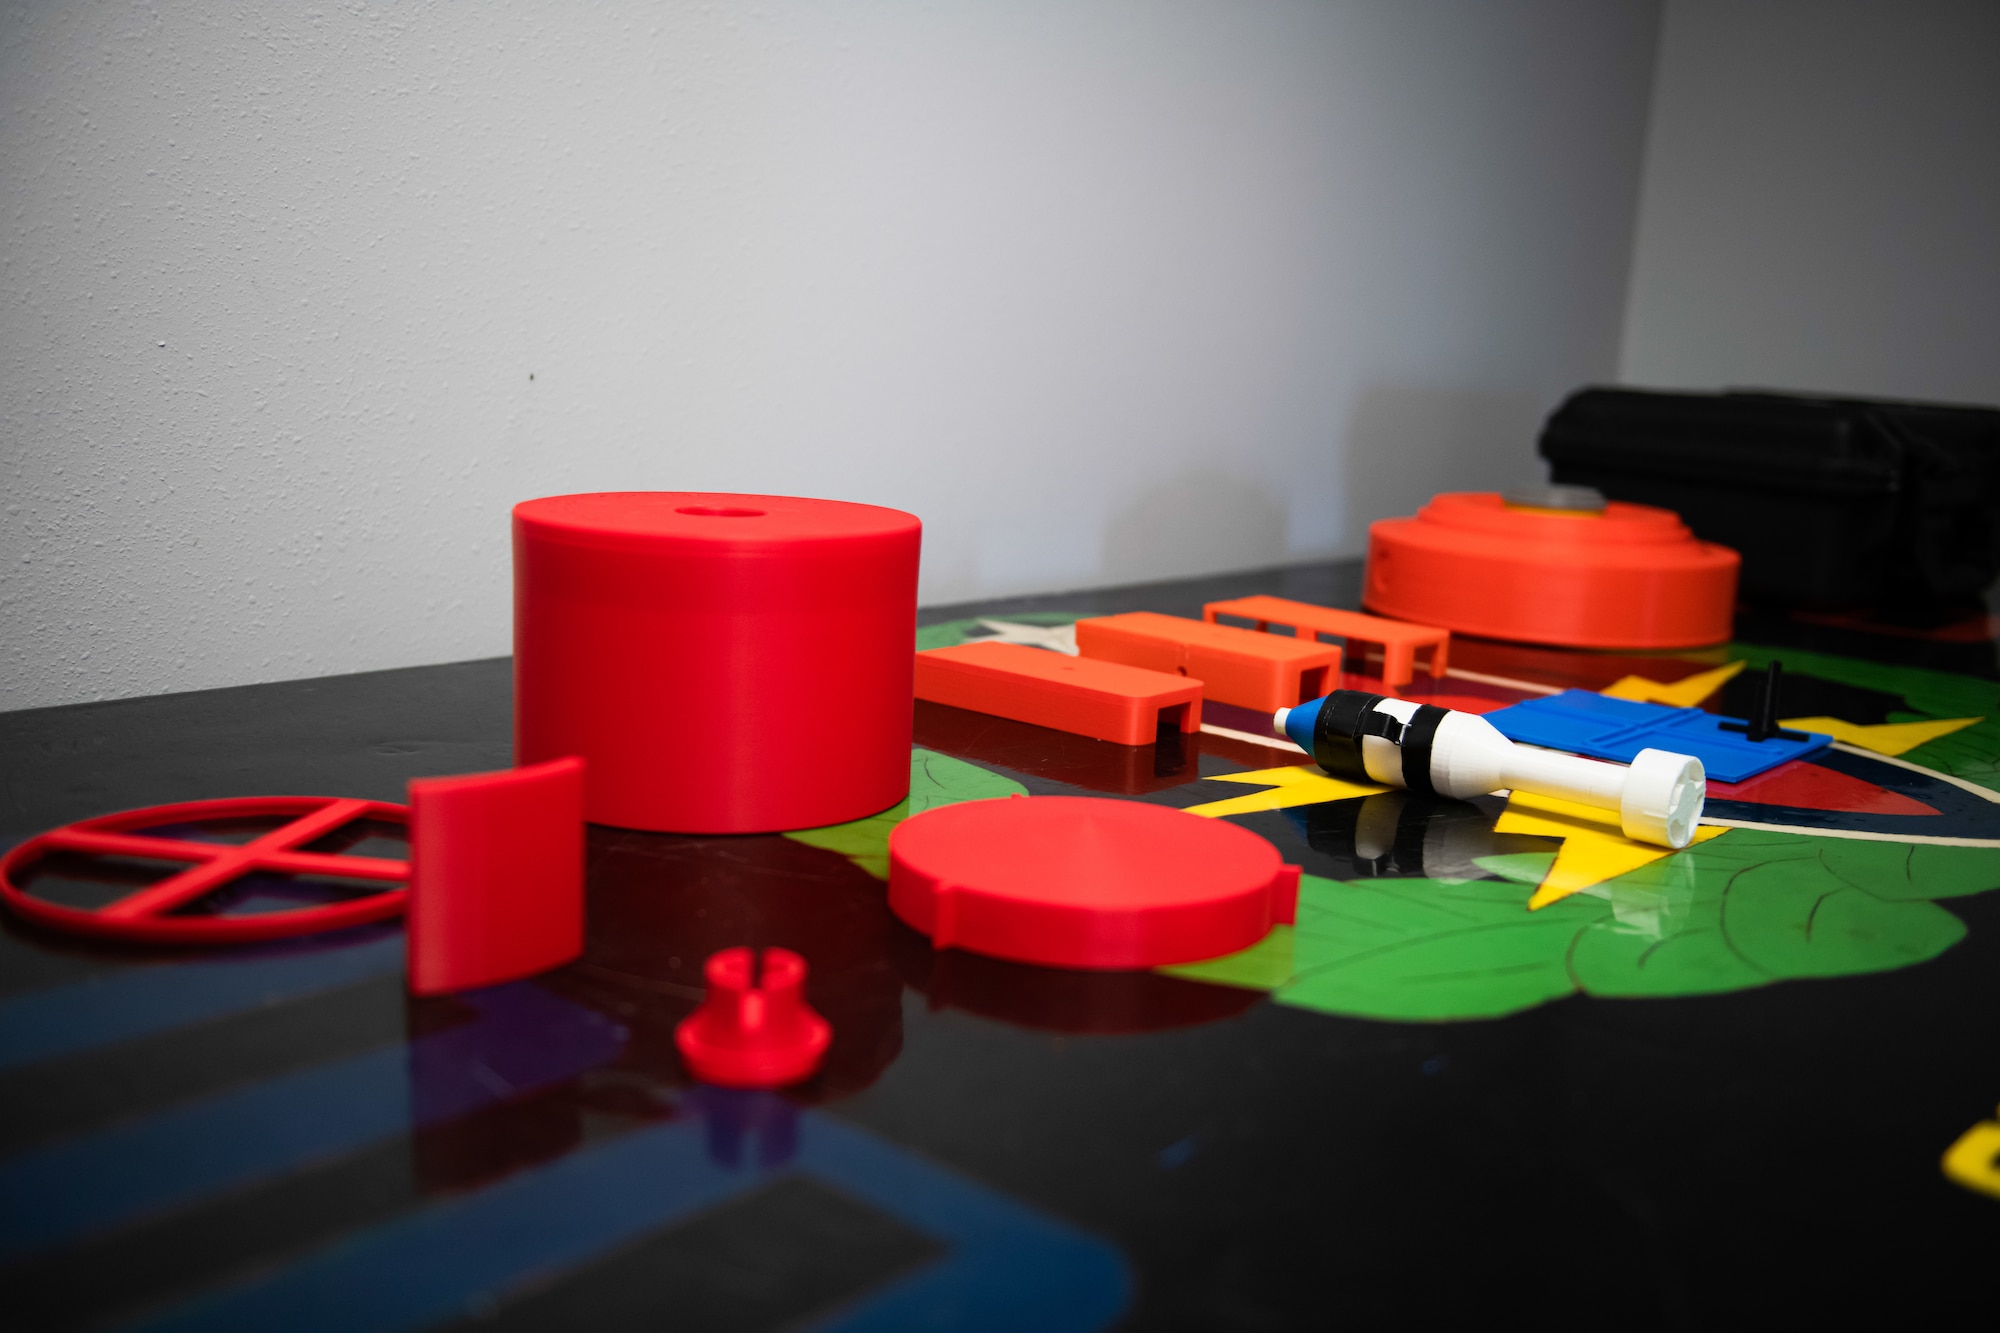 3D printed training aids are displayed on a table.